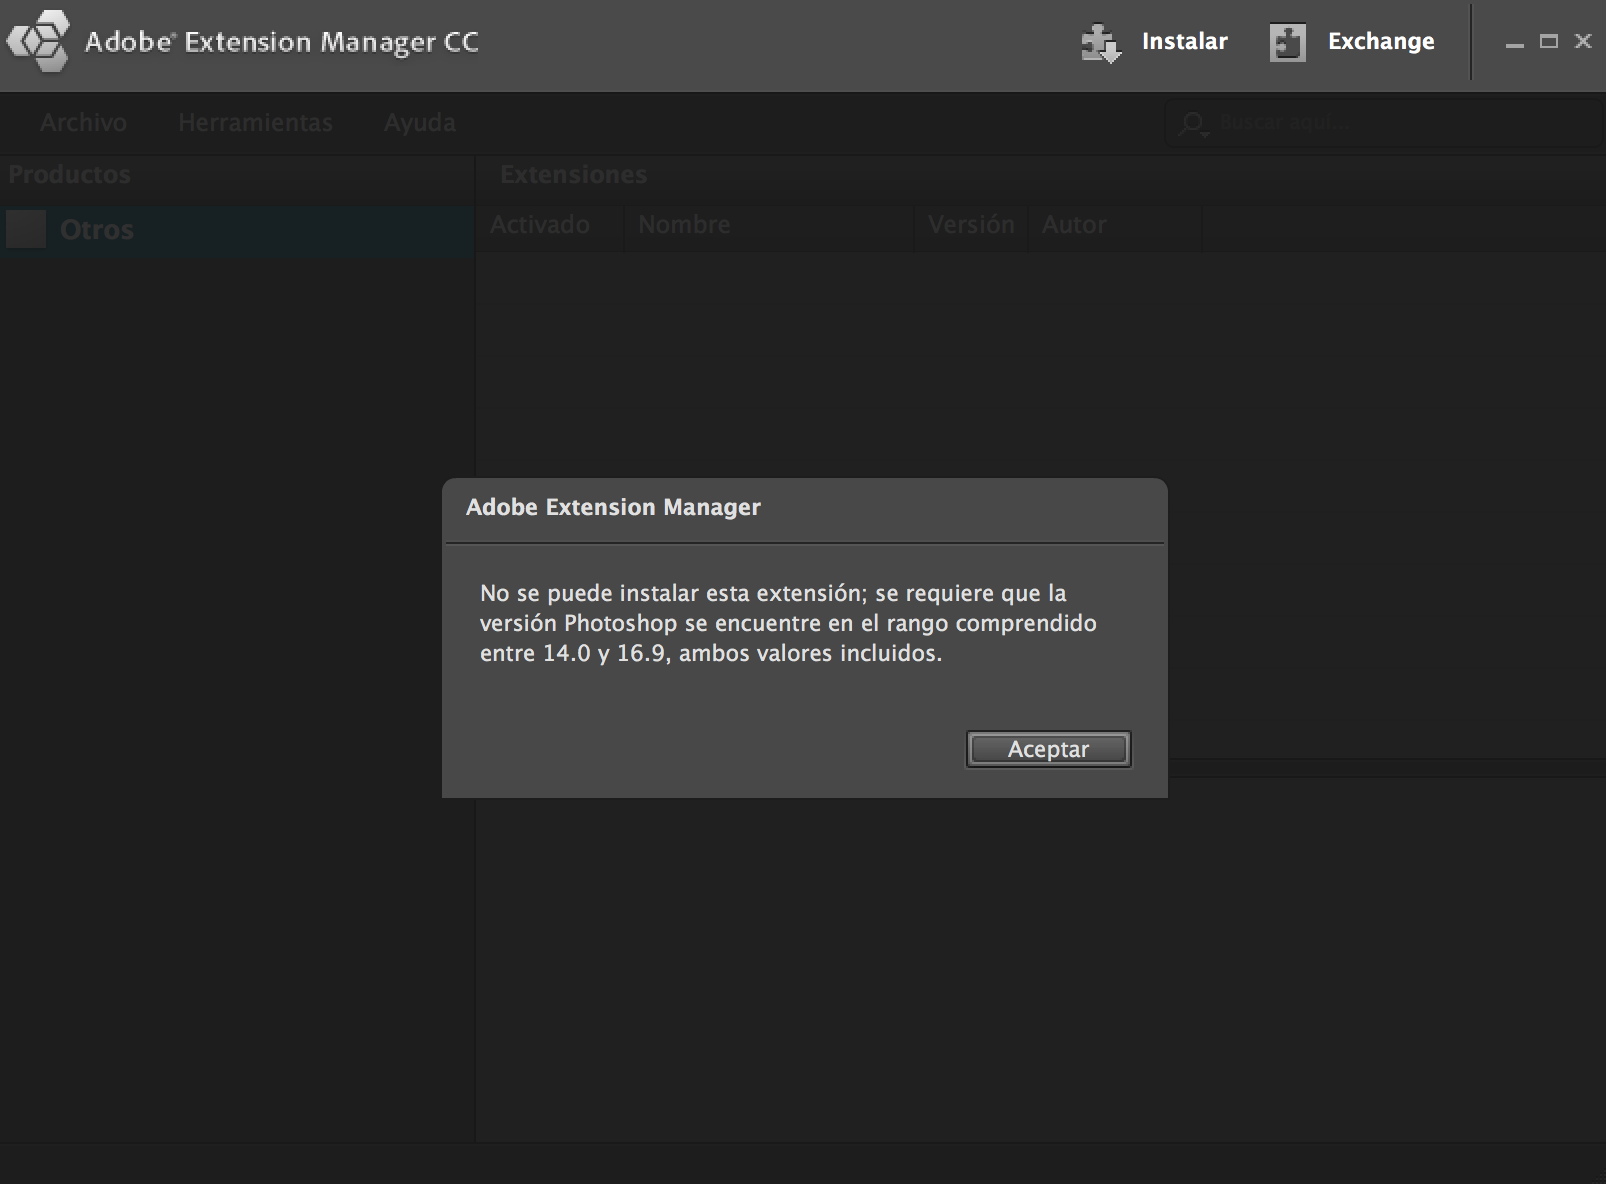 Extension manager. Adobe Extension Manager cs6. Adobe Exchange. Adobe Extension Panel. ZXP installer Premiere Pro.